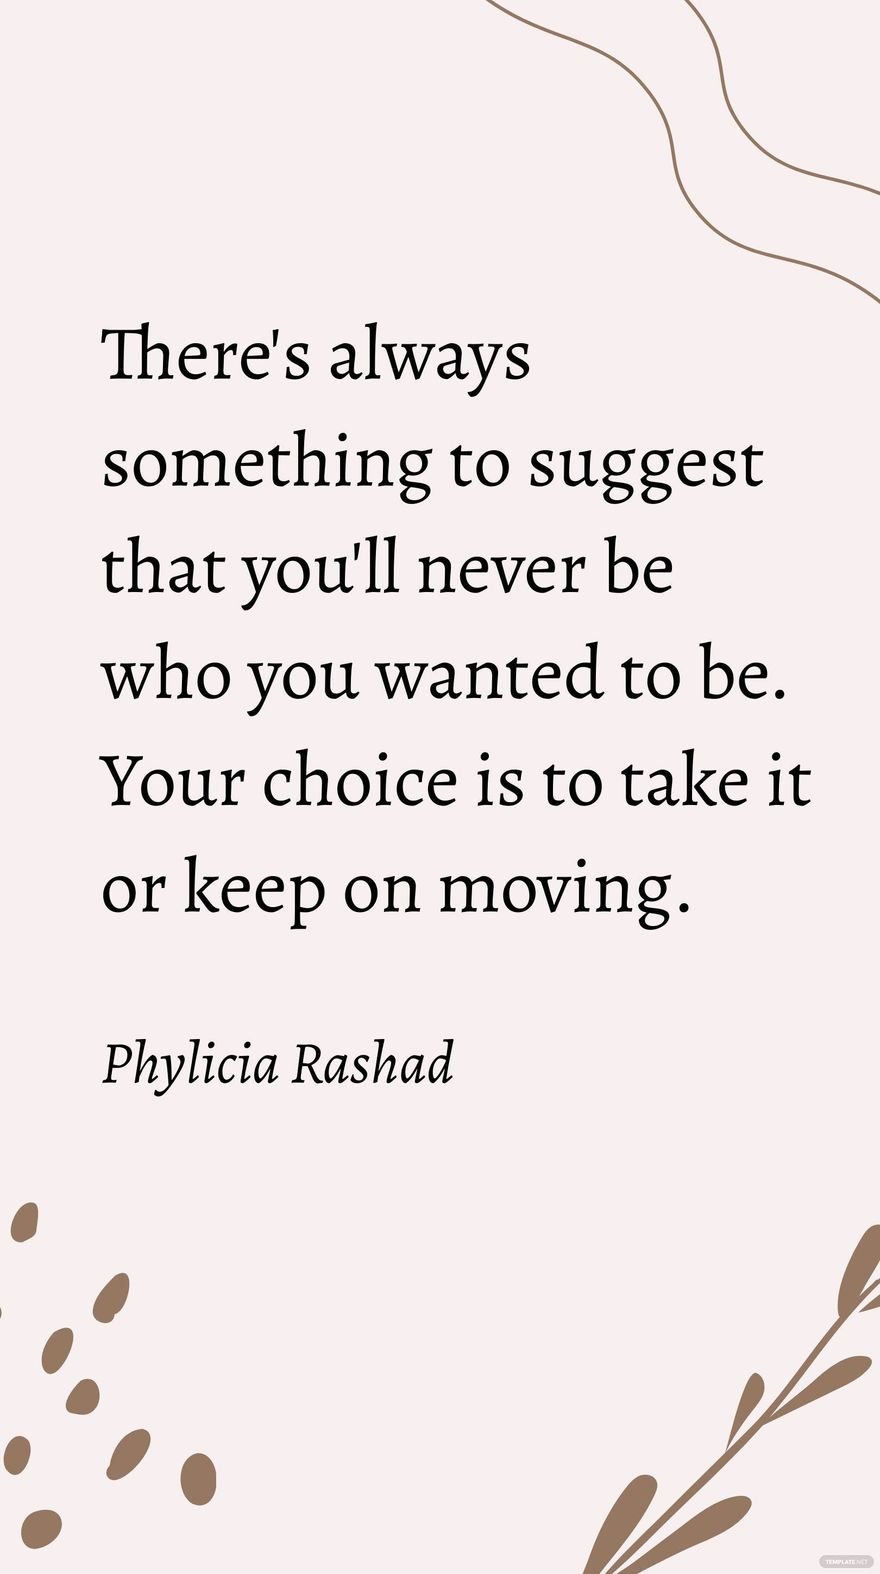 Phylicia Rashad - There's always something to suggest that you'll never be who you wanted to be. Your choice is to take it or keep on moving.